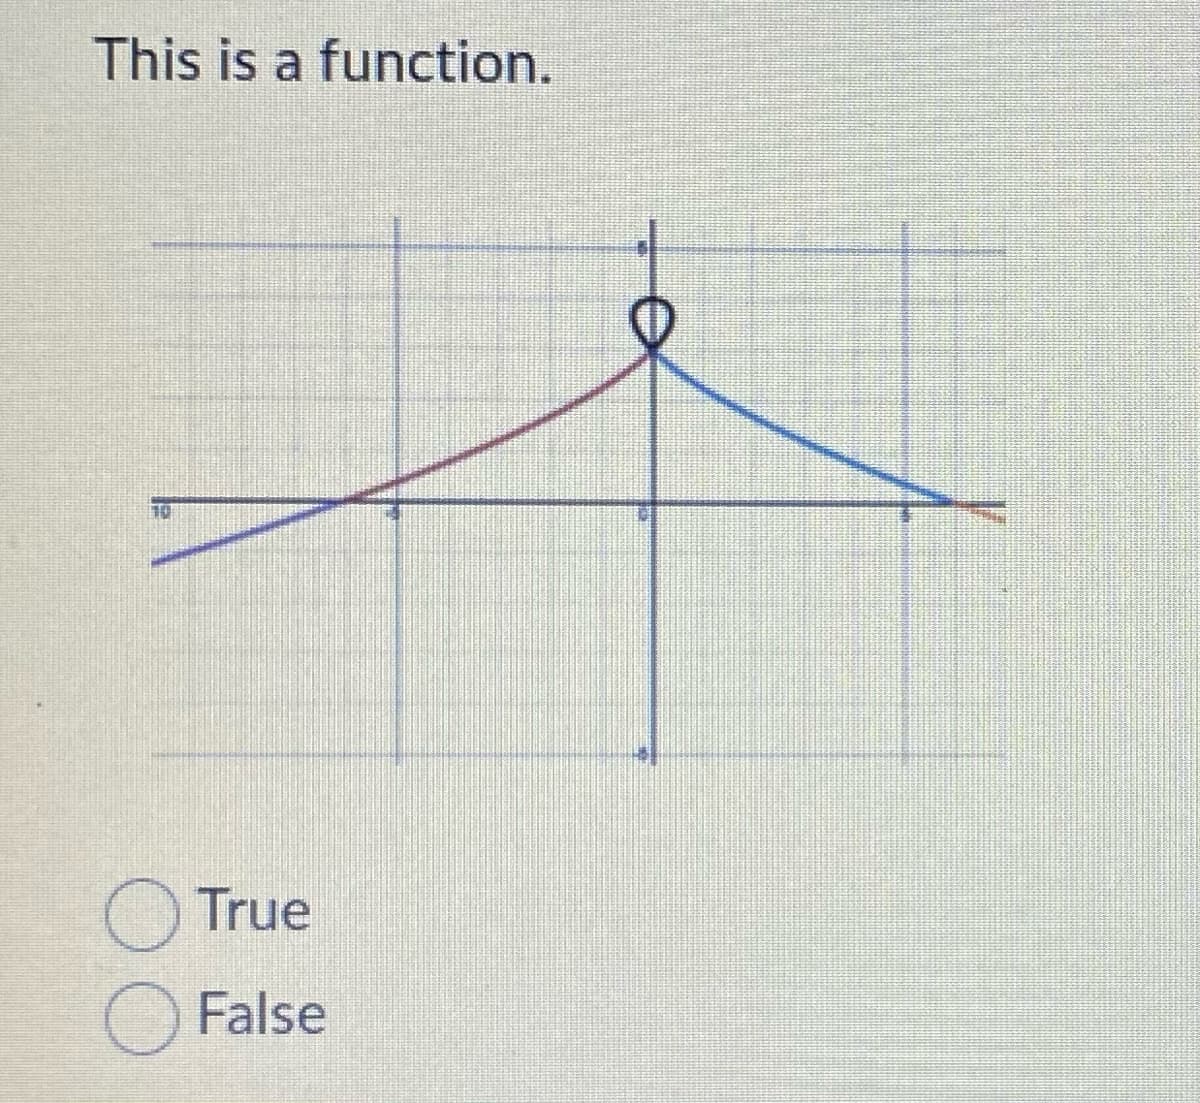 This is a function.
O True
False
